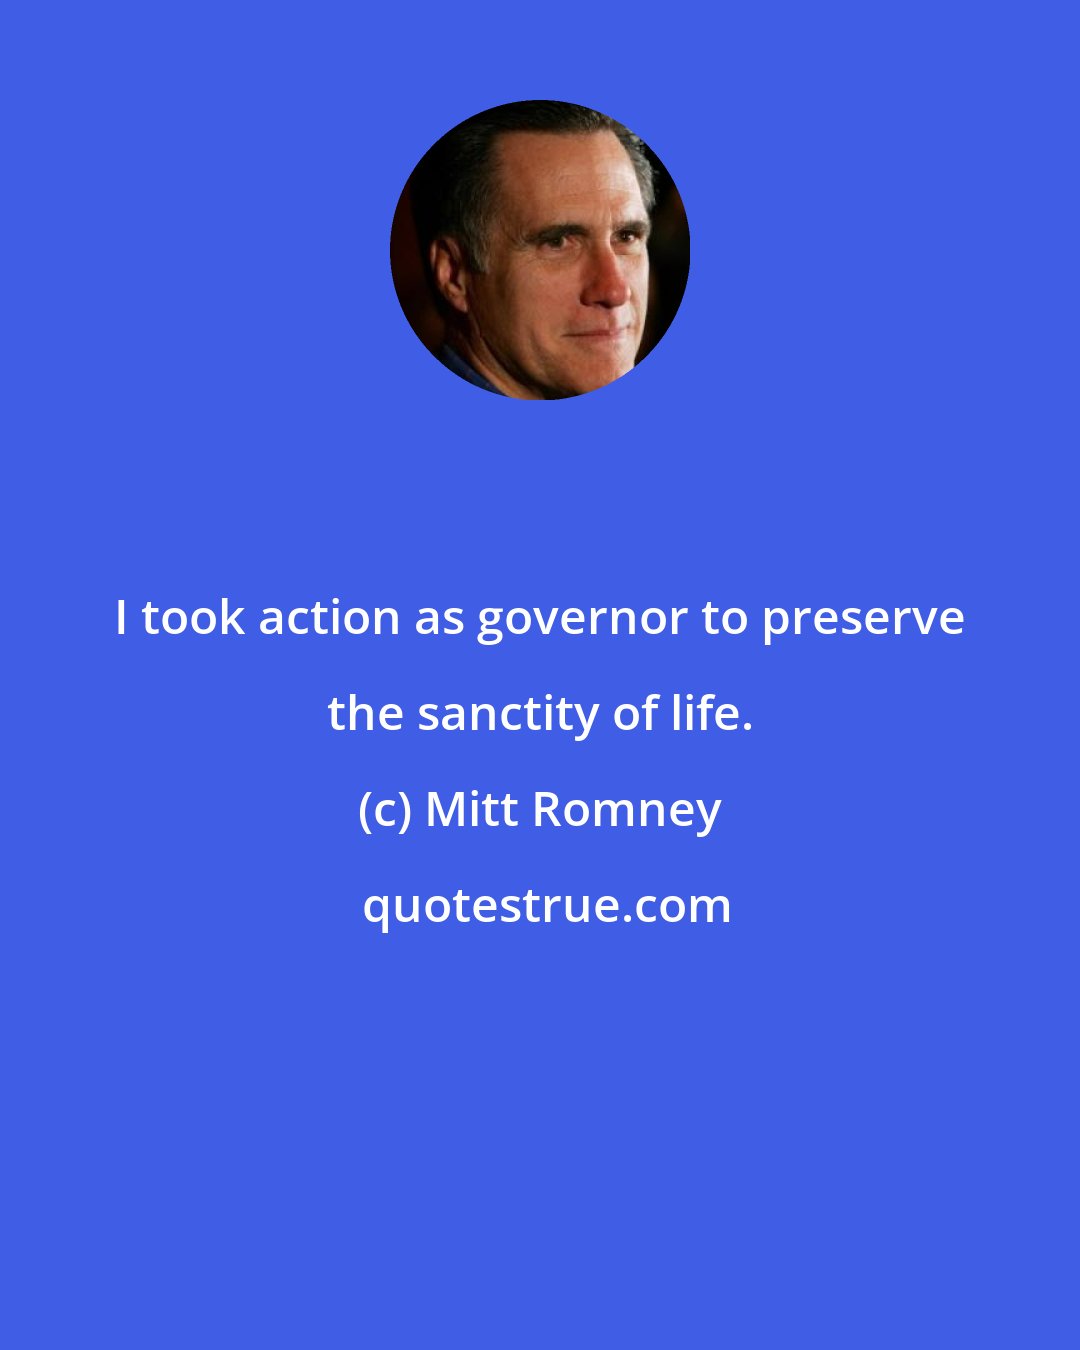 Mitt Romney: I took action as governor to preserve the sanctity of life.